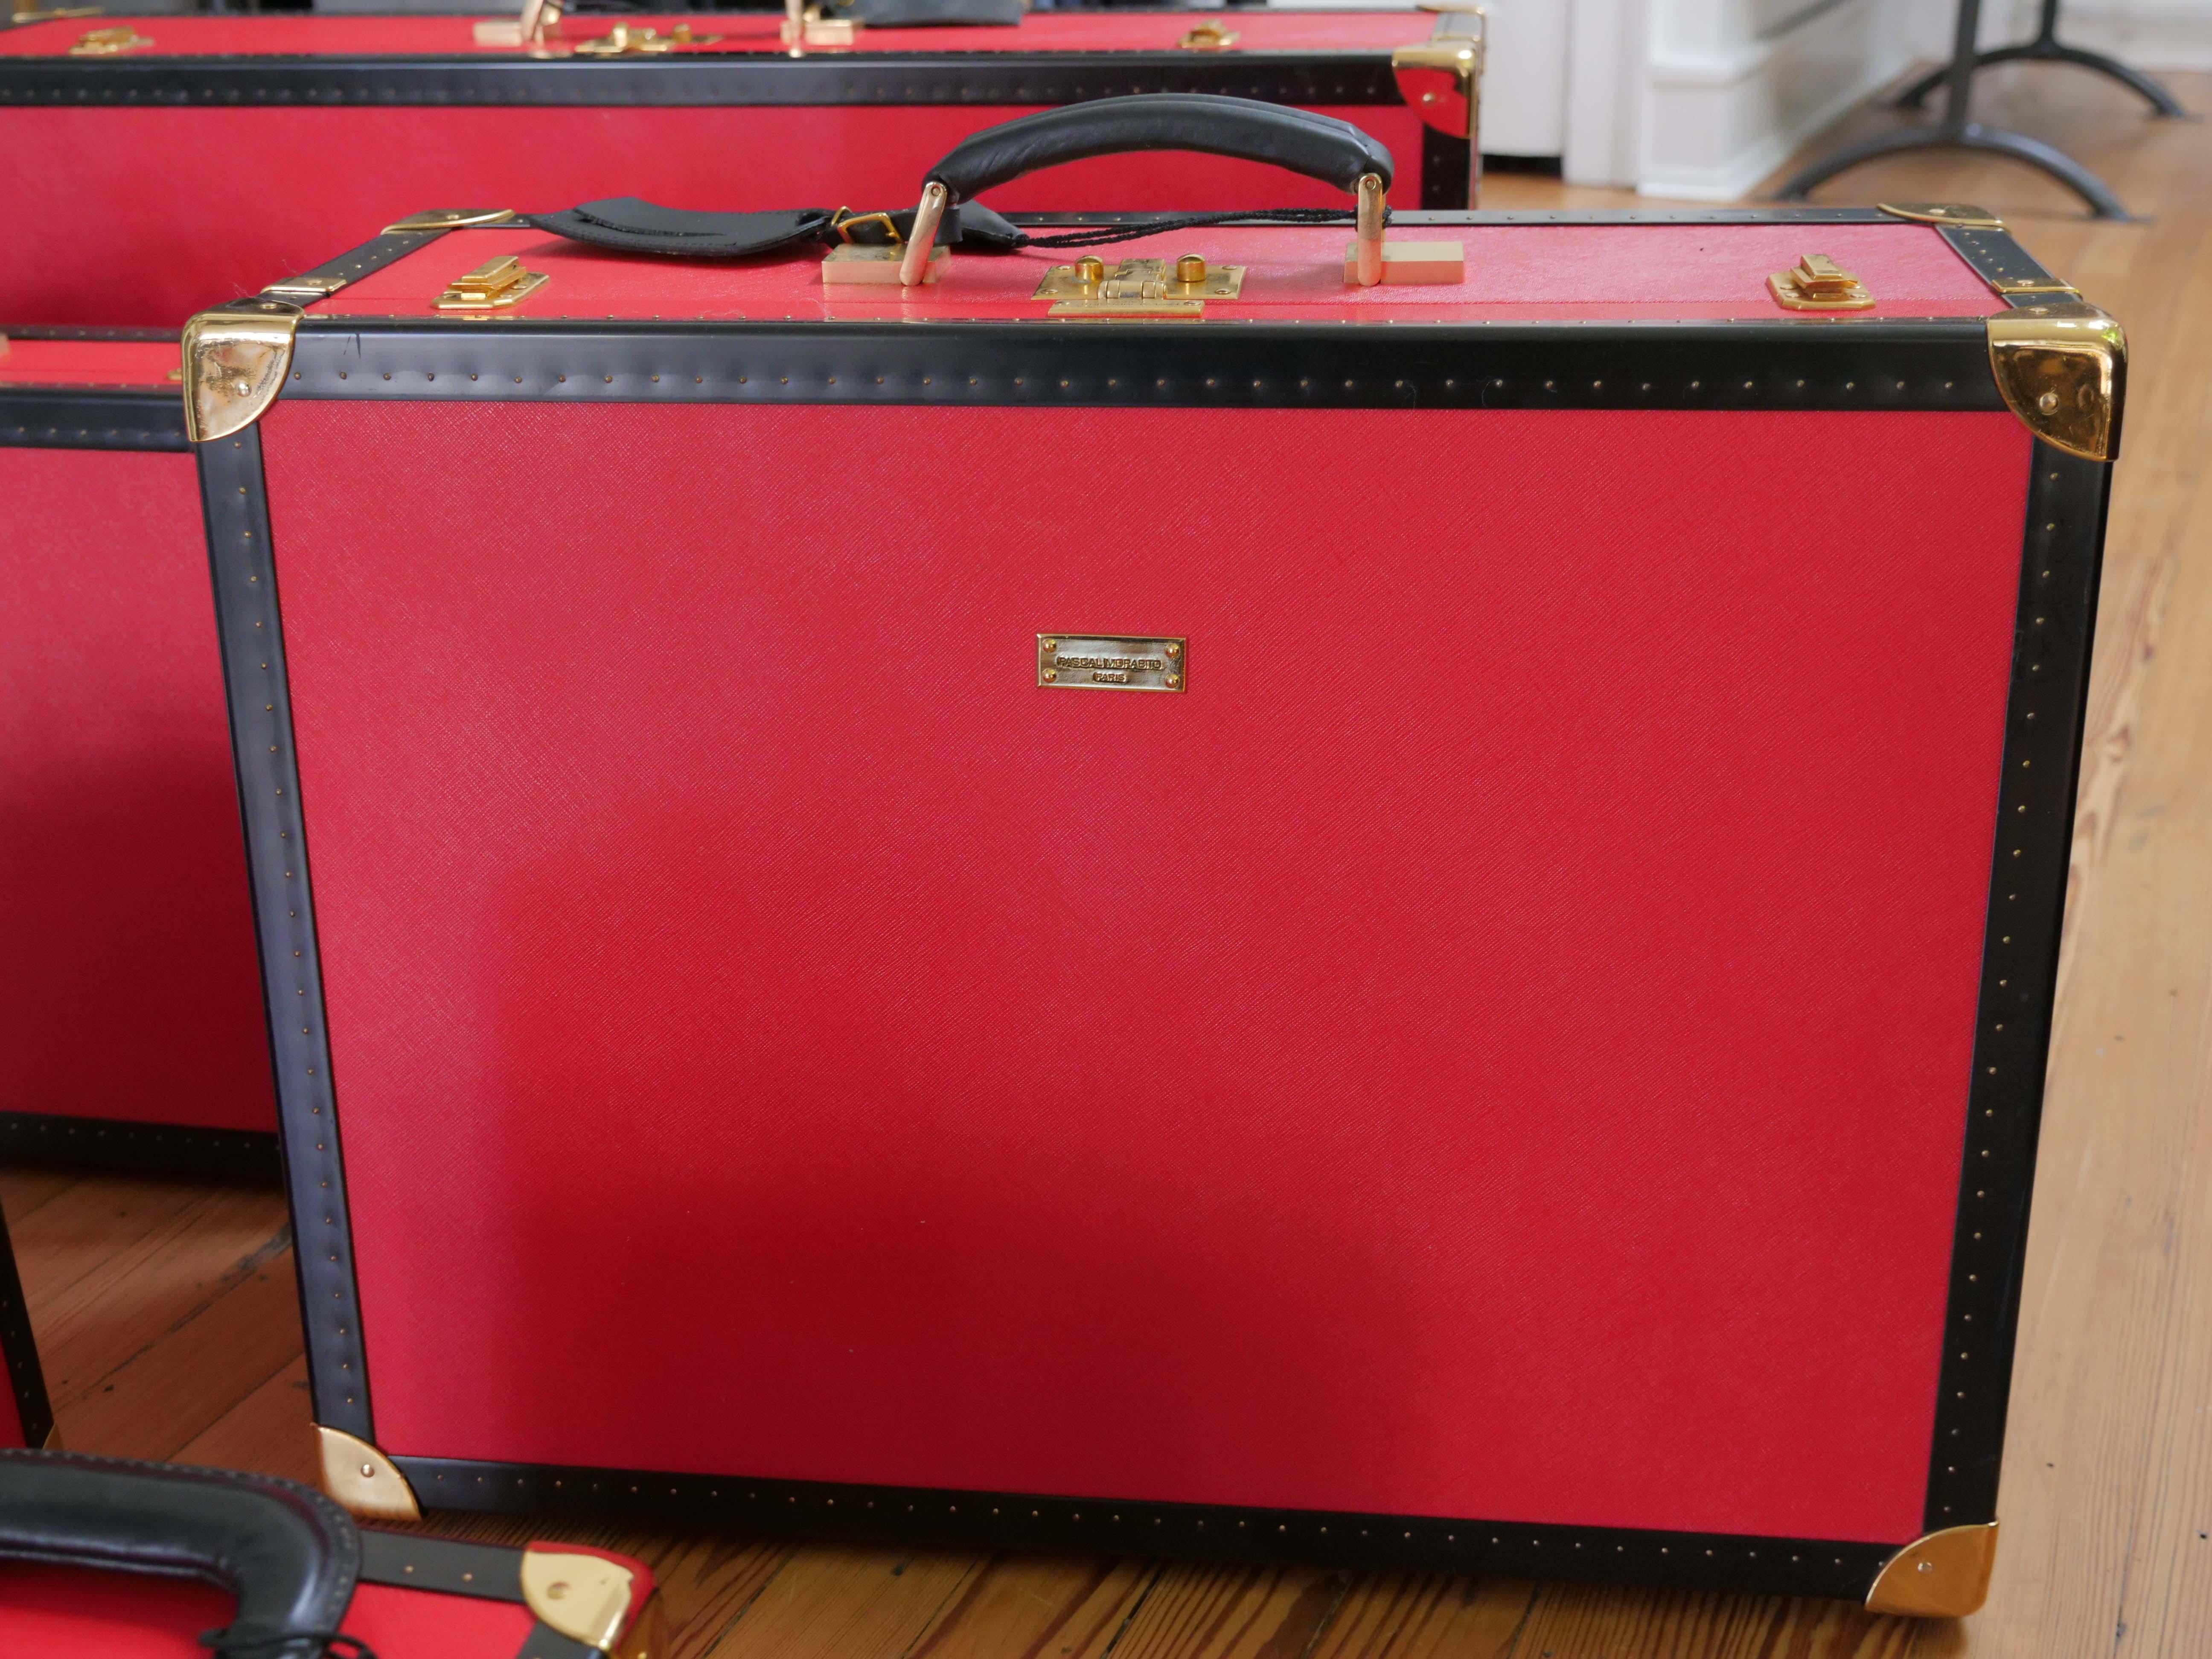 French Pascal Morabito Porsche 5-Piece Hard Red Luggage